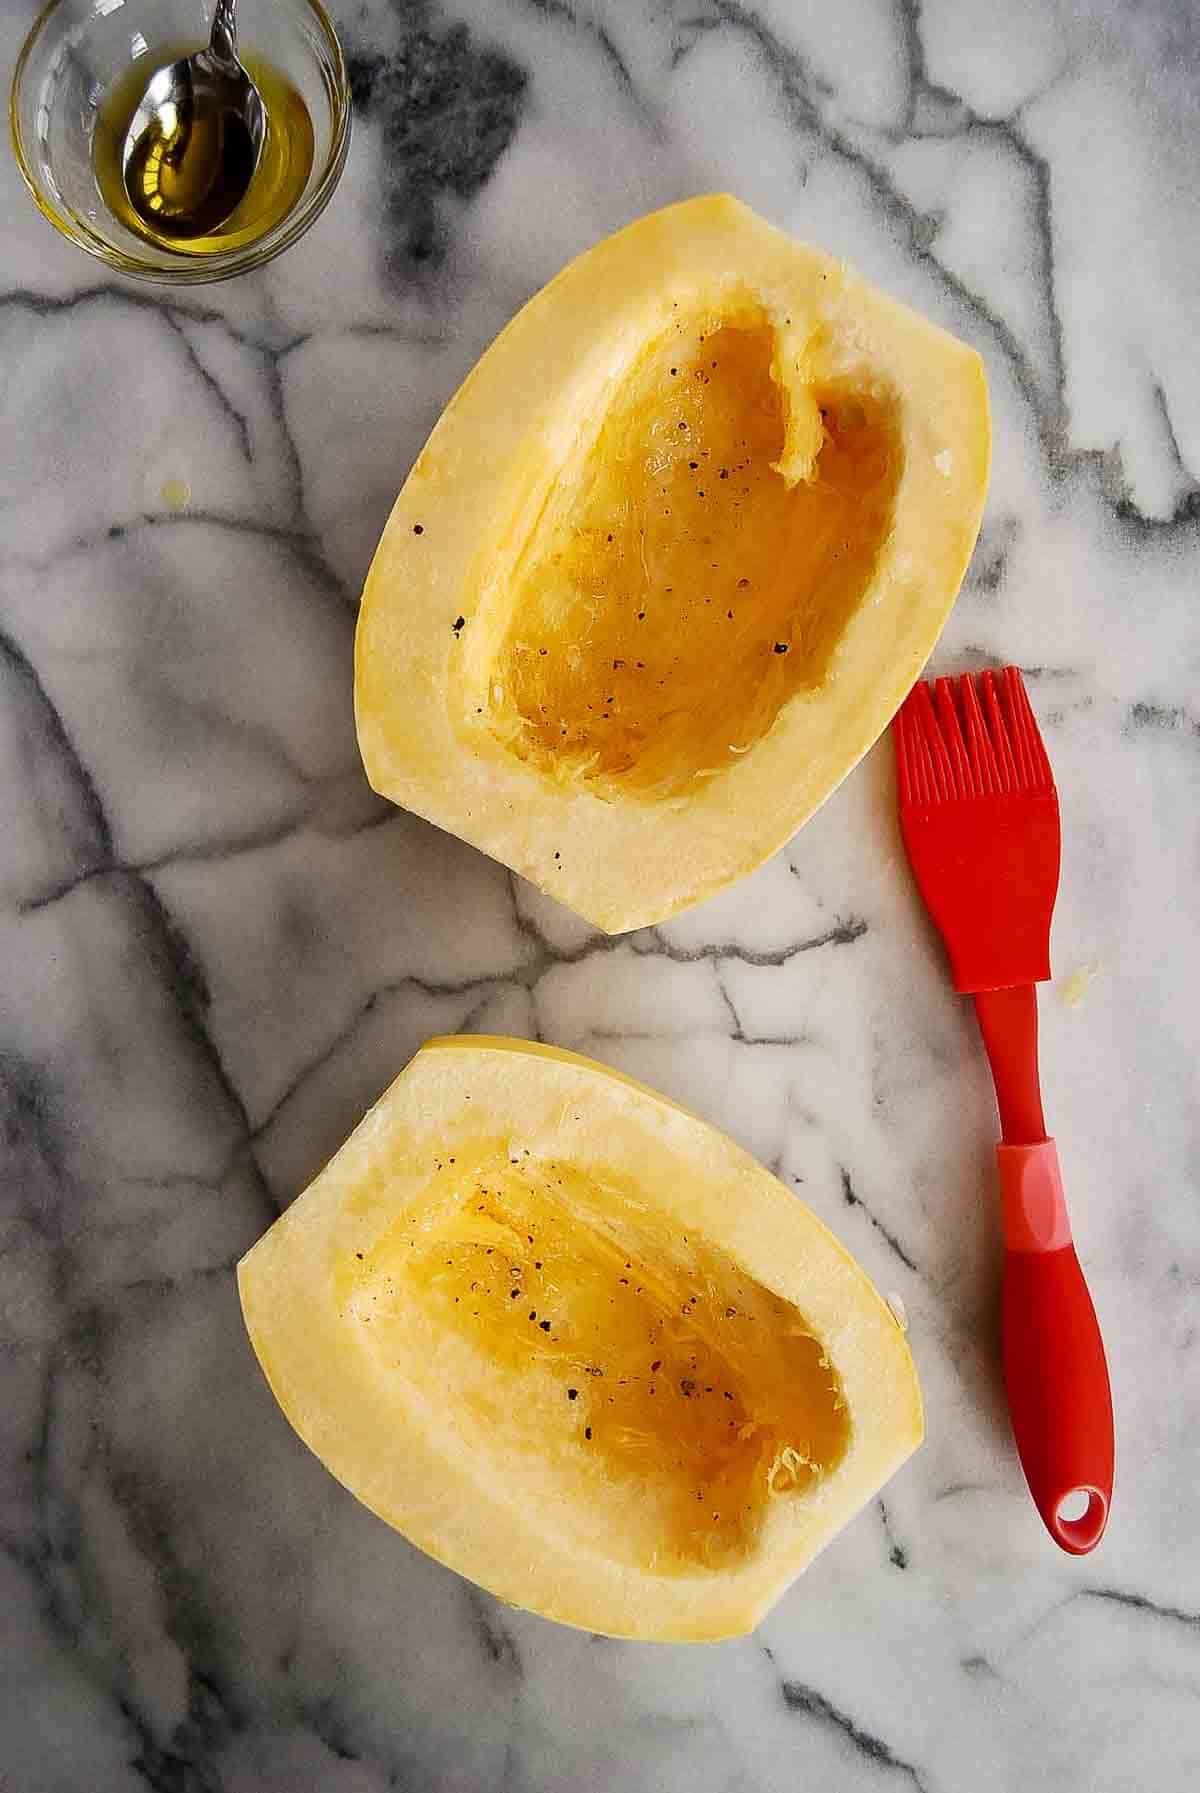 halves of spaghetti squash brushed with oil and sprinkled with salt and pepper.